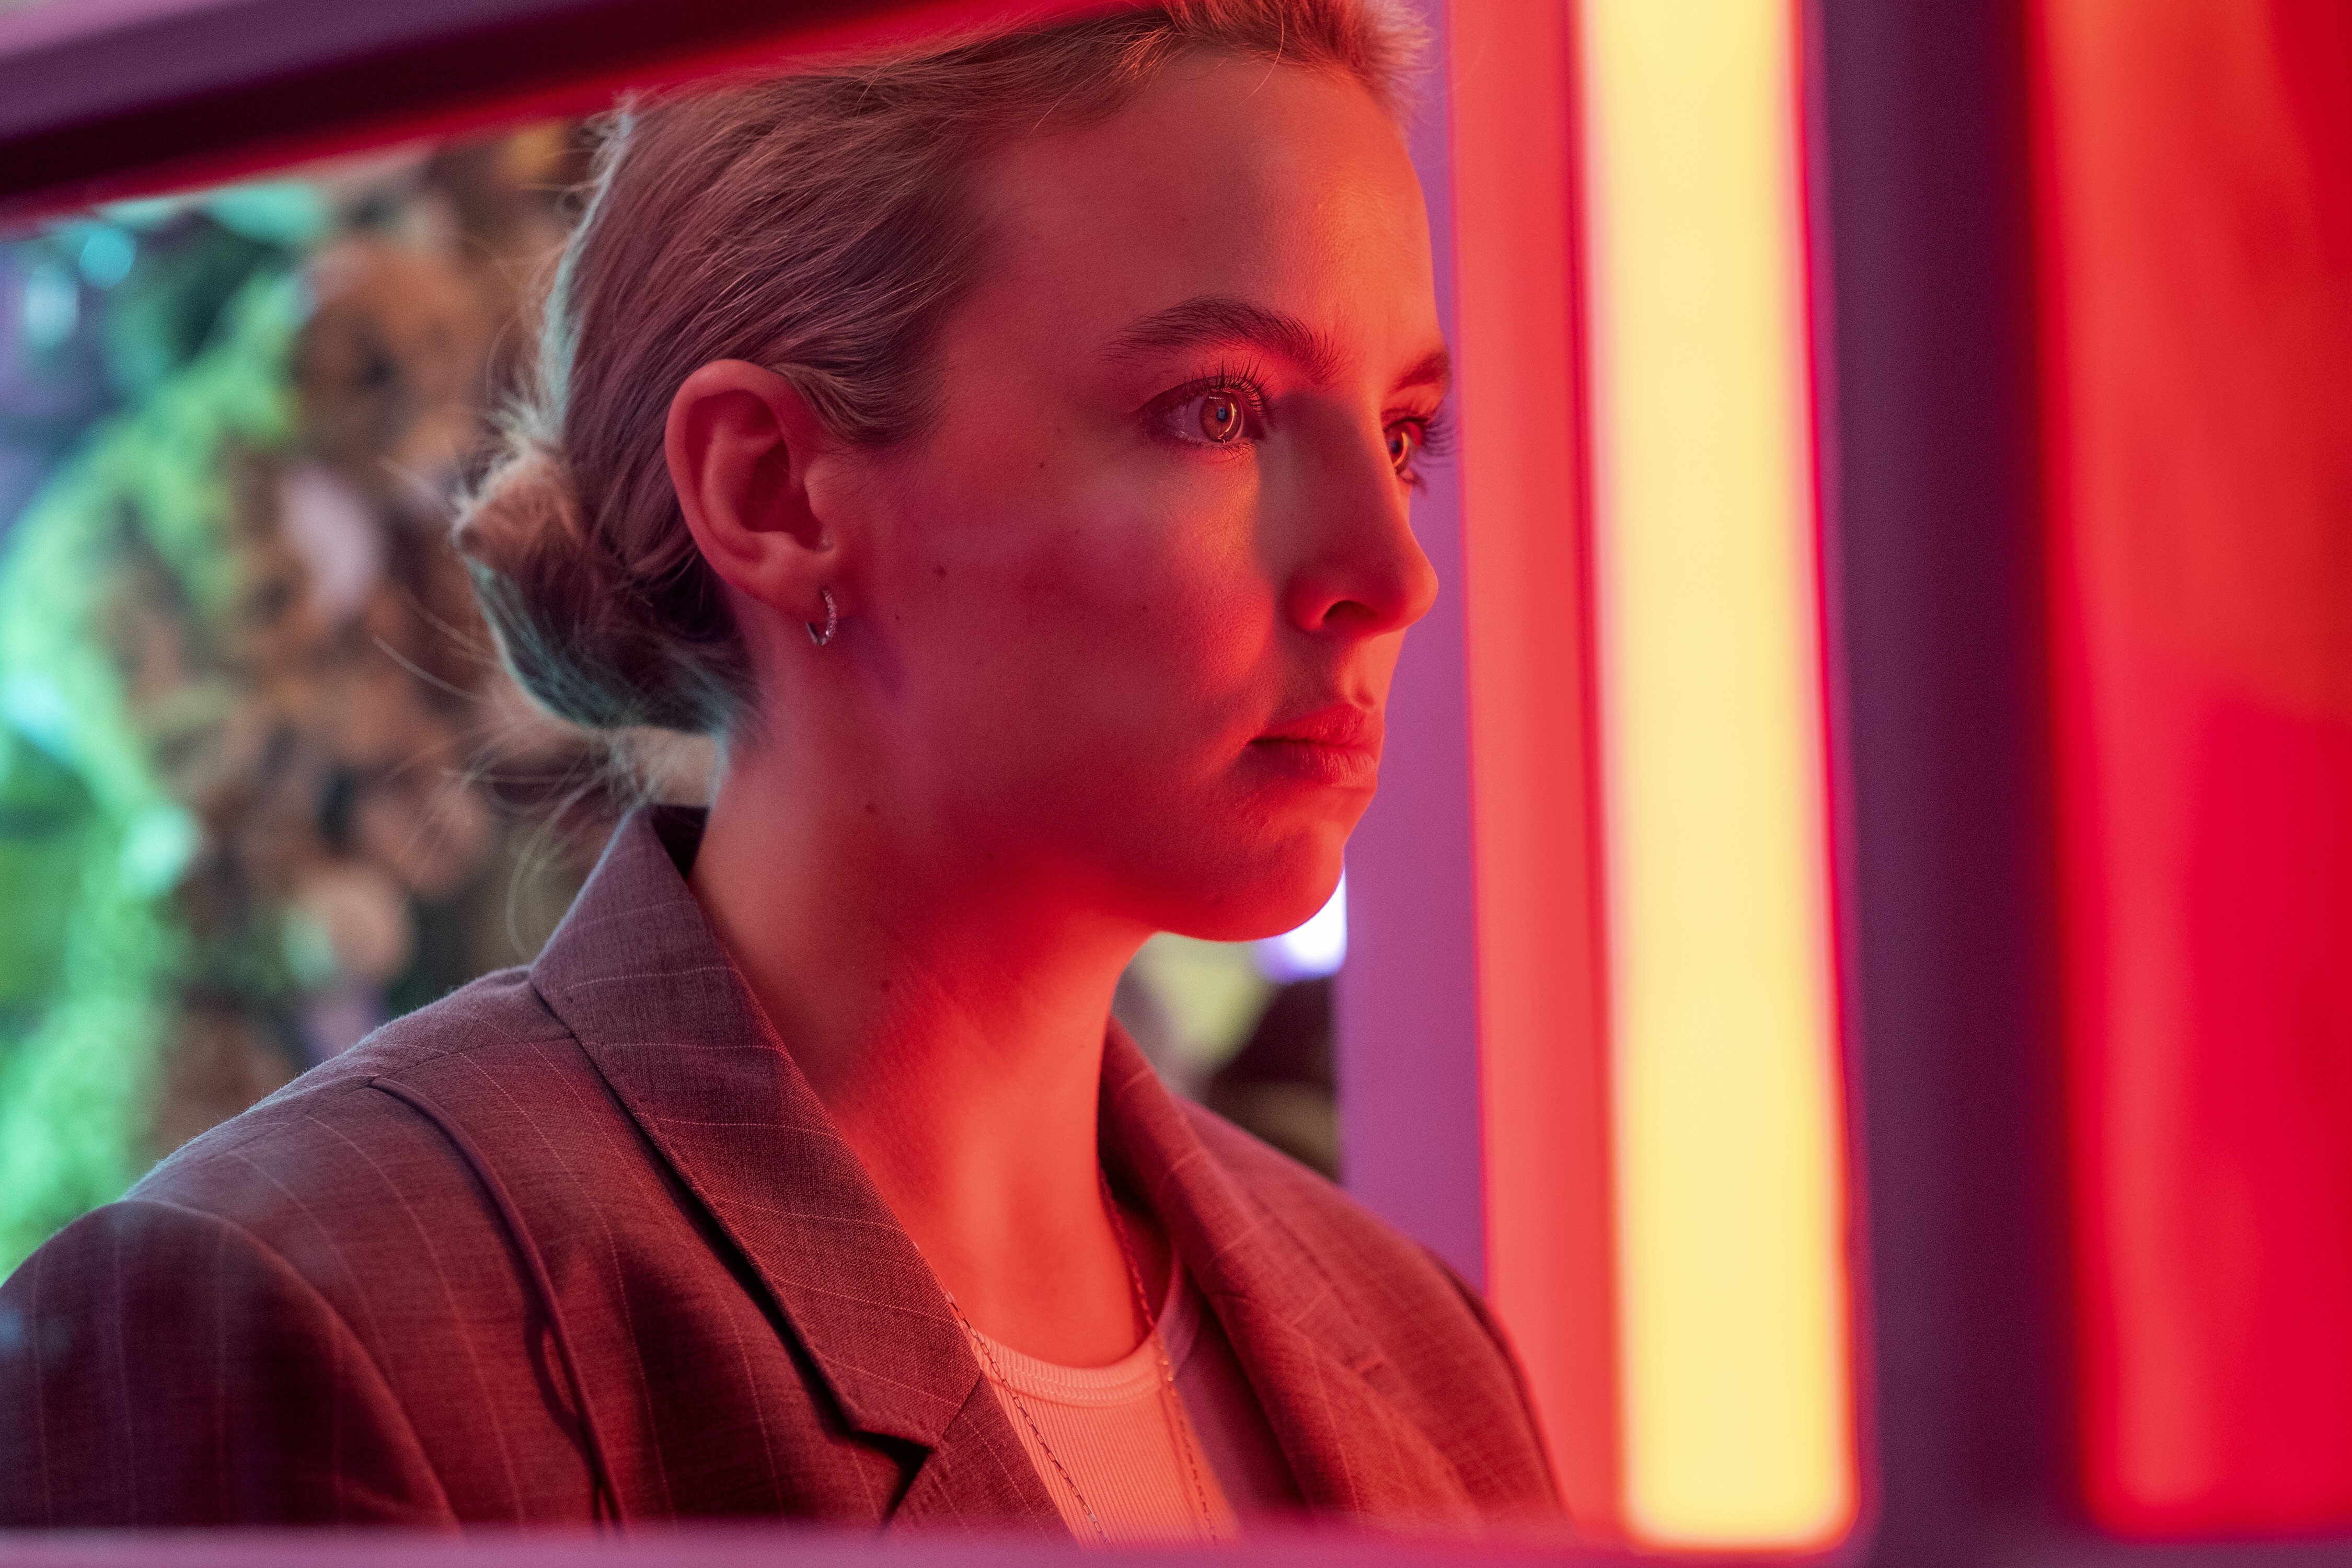 Jodie Comer as Villanelle in a still from Killing Eve Season 3. Photo: Ludovic Robert/BBC America/Sid Gentle